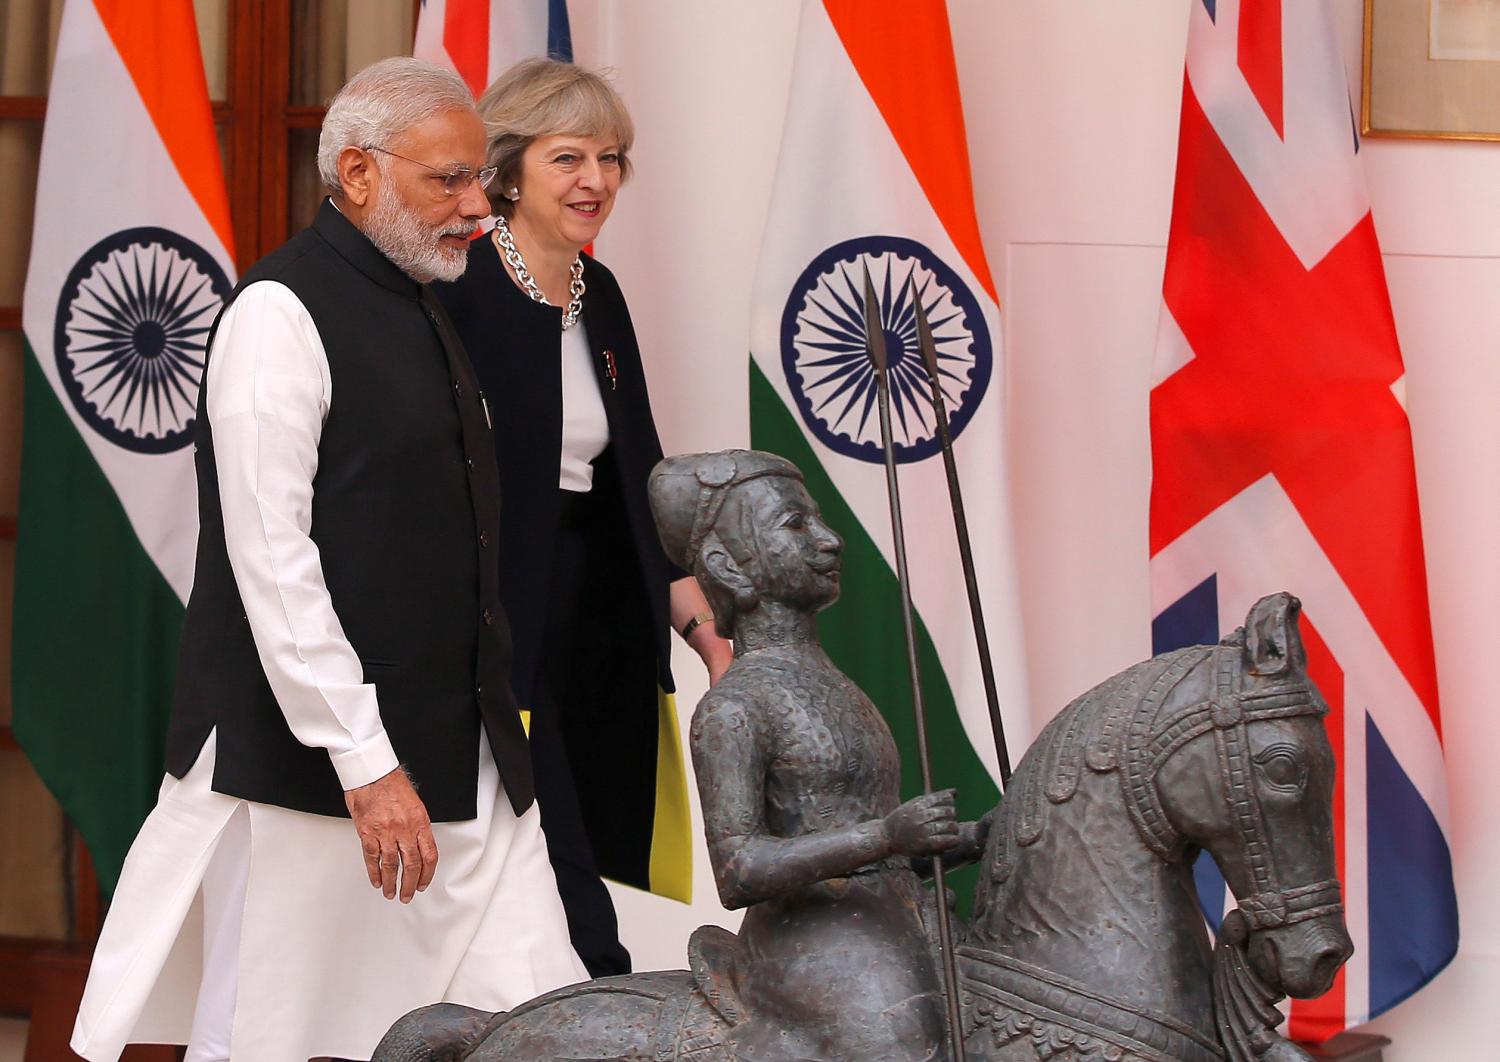 Britain's Prime Minister Theresa May (R) and her Indian counterpart Narendra Modi arrive for a photo opportunity ahead of their meeting at Hyderabad House in New Delhi, India, November 7, 2016. REUTERS/Adnan Abidi -